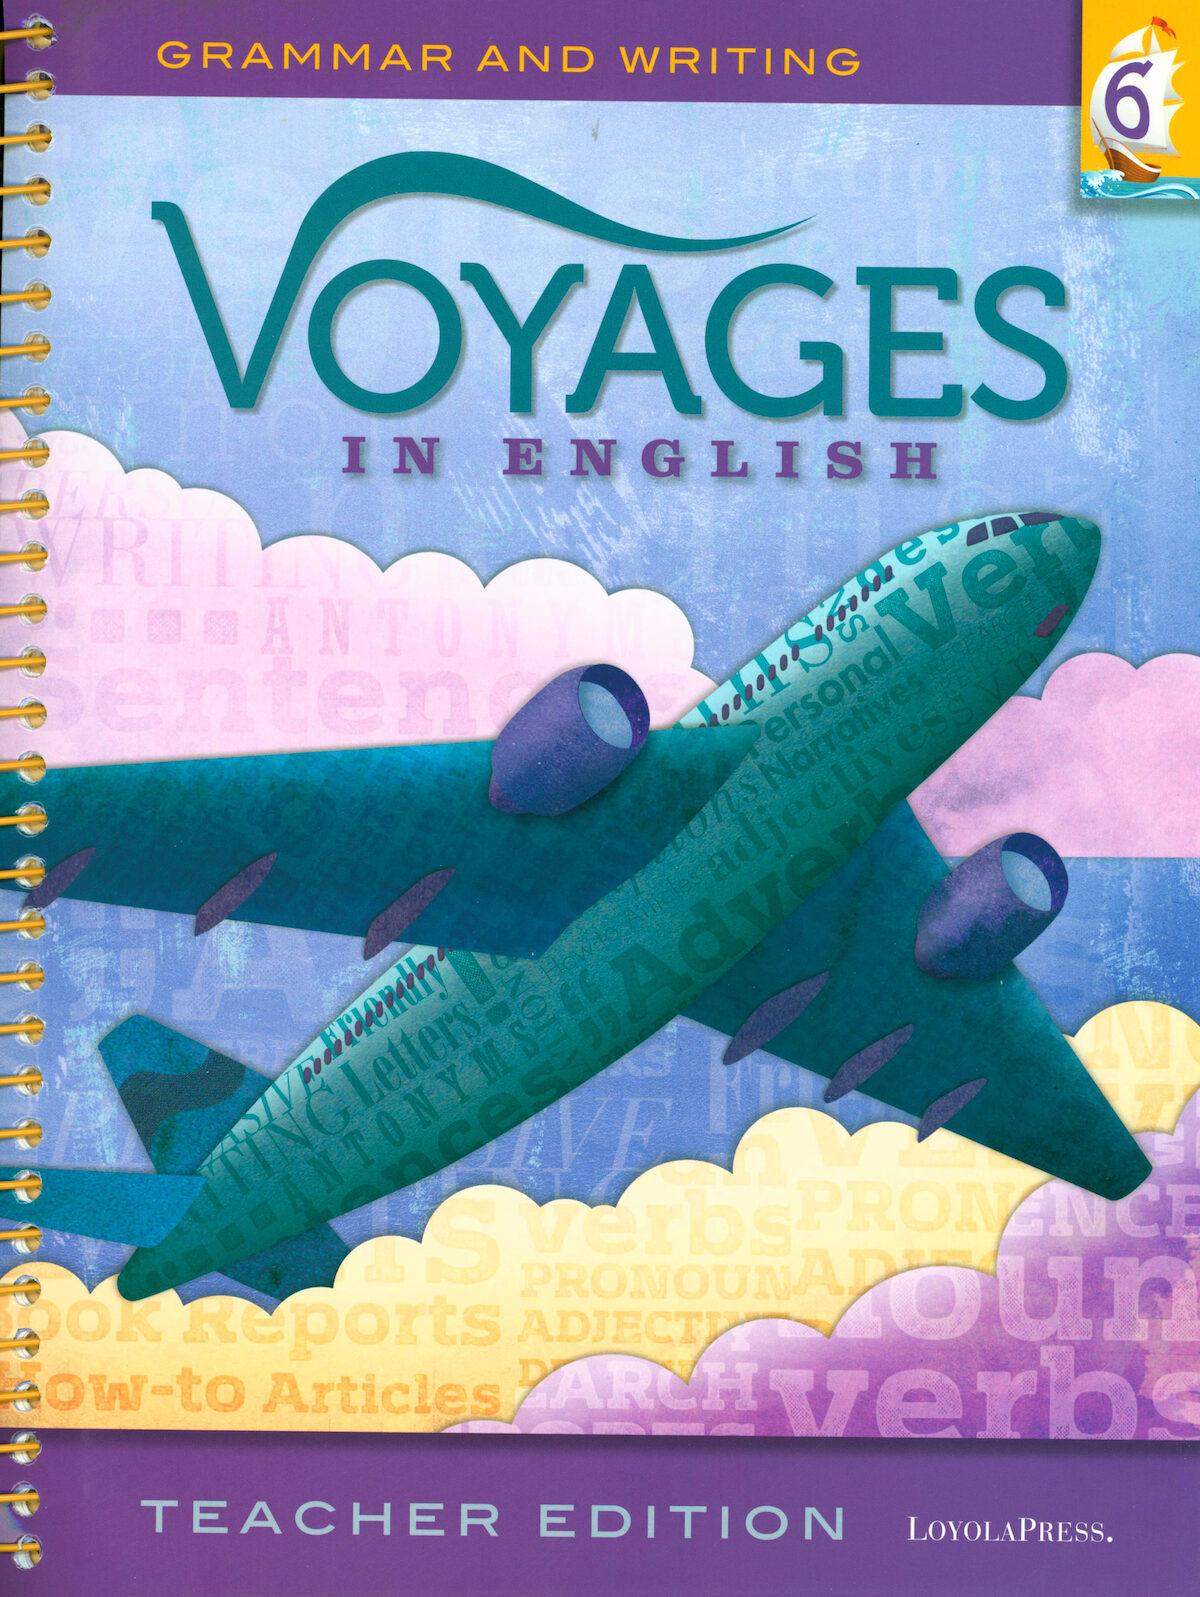 the voyage for schools